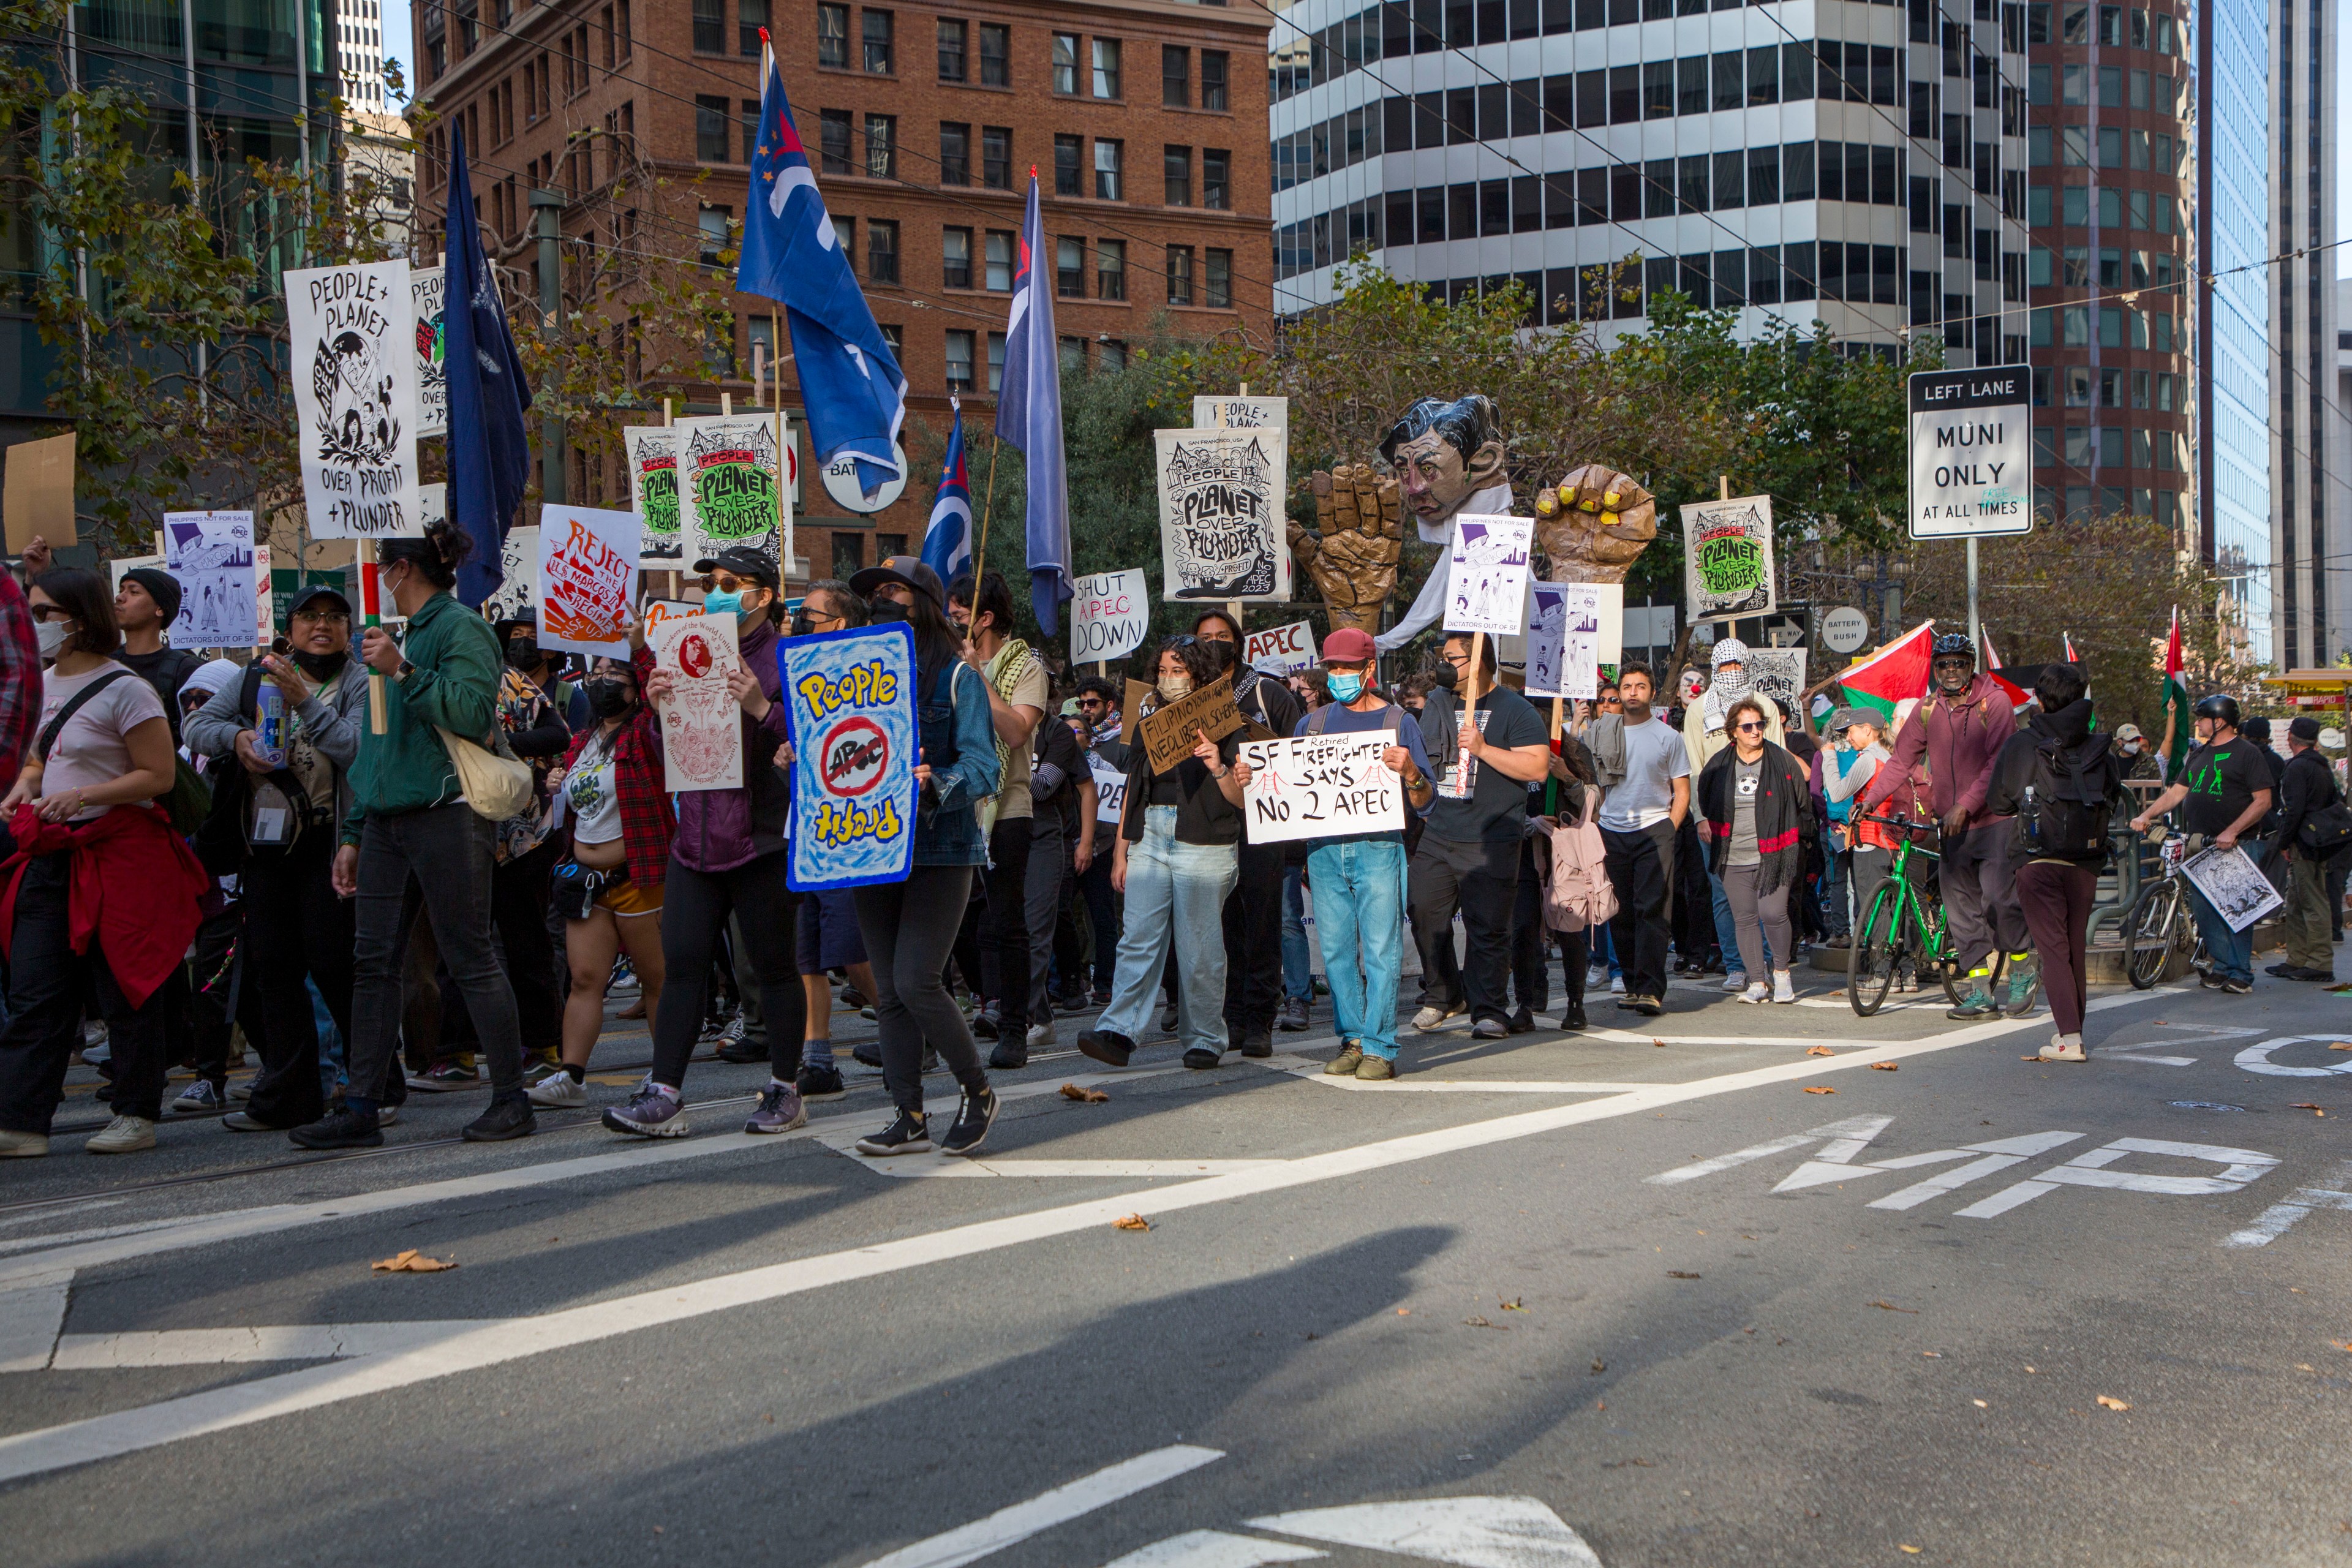 Thousands of people are protesting APEC on Market Street in San Francisco, holding signs against the conference.